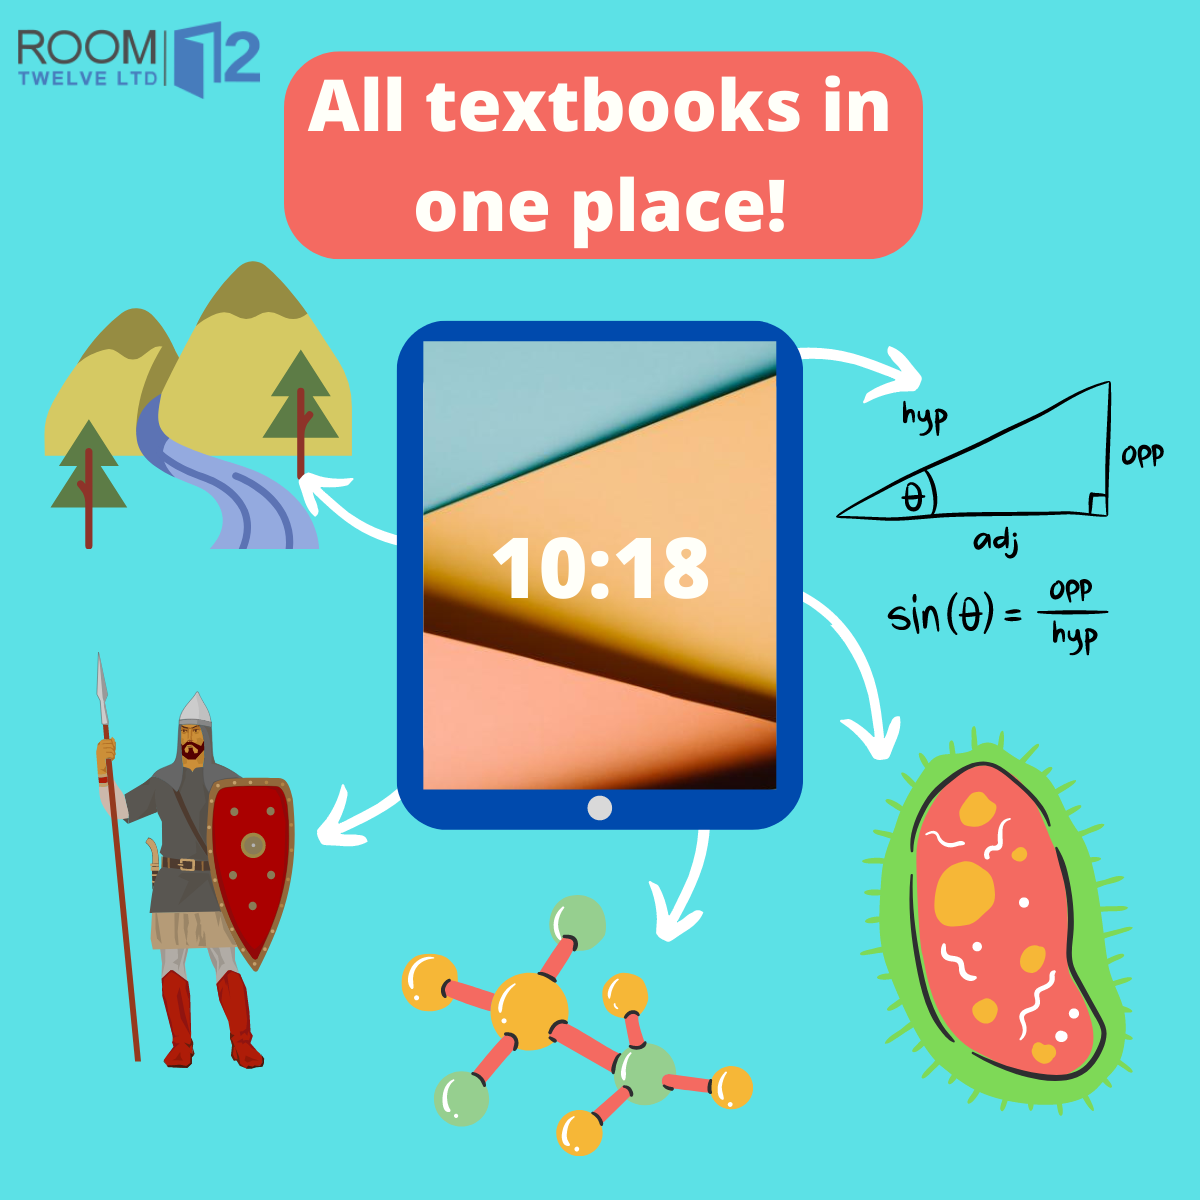 A graphic showing the different types of textbooks a school tablet can store